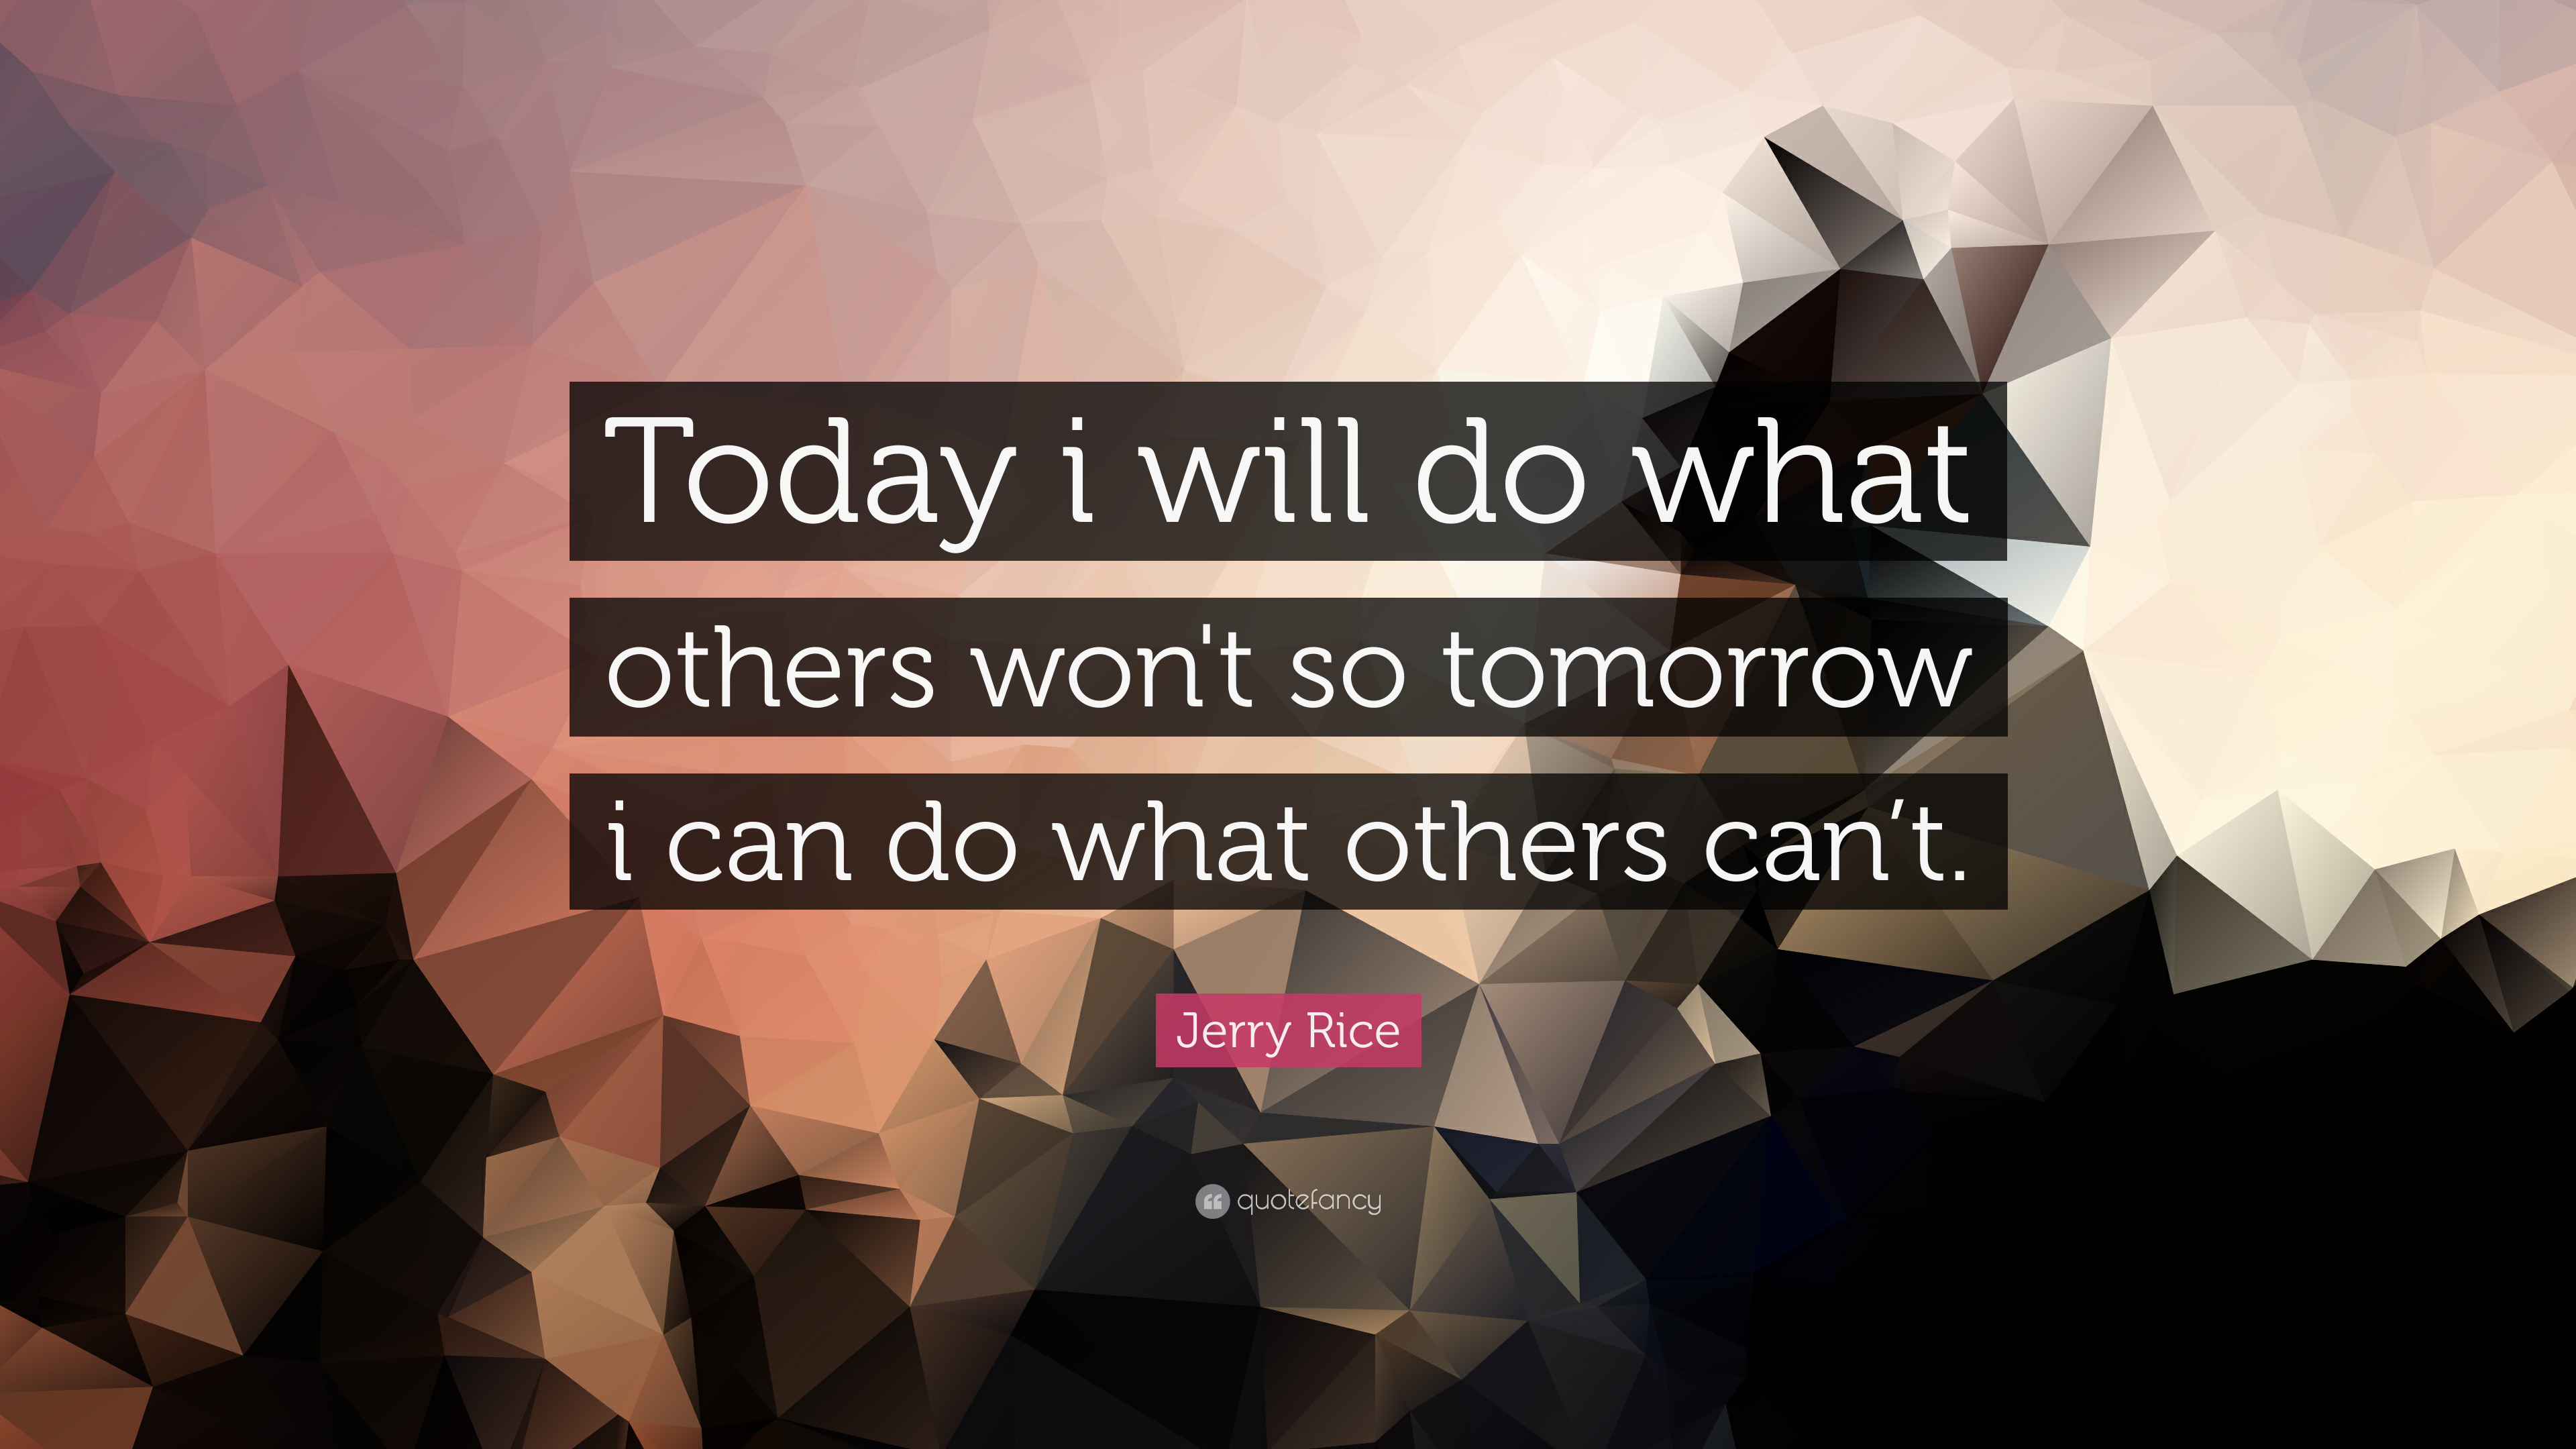 “Today I will do what others won’t, so tomorrow I can do what others can’t.” – Jerry Rice